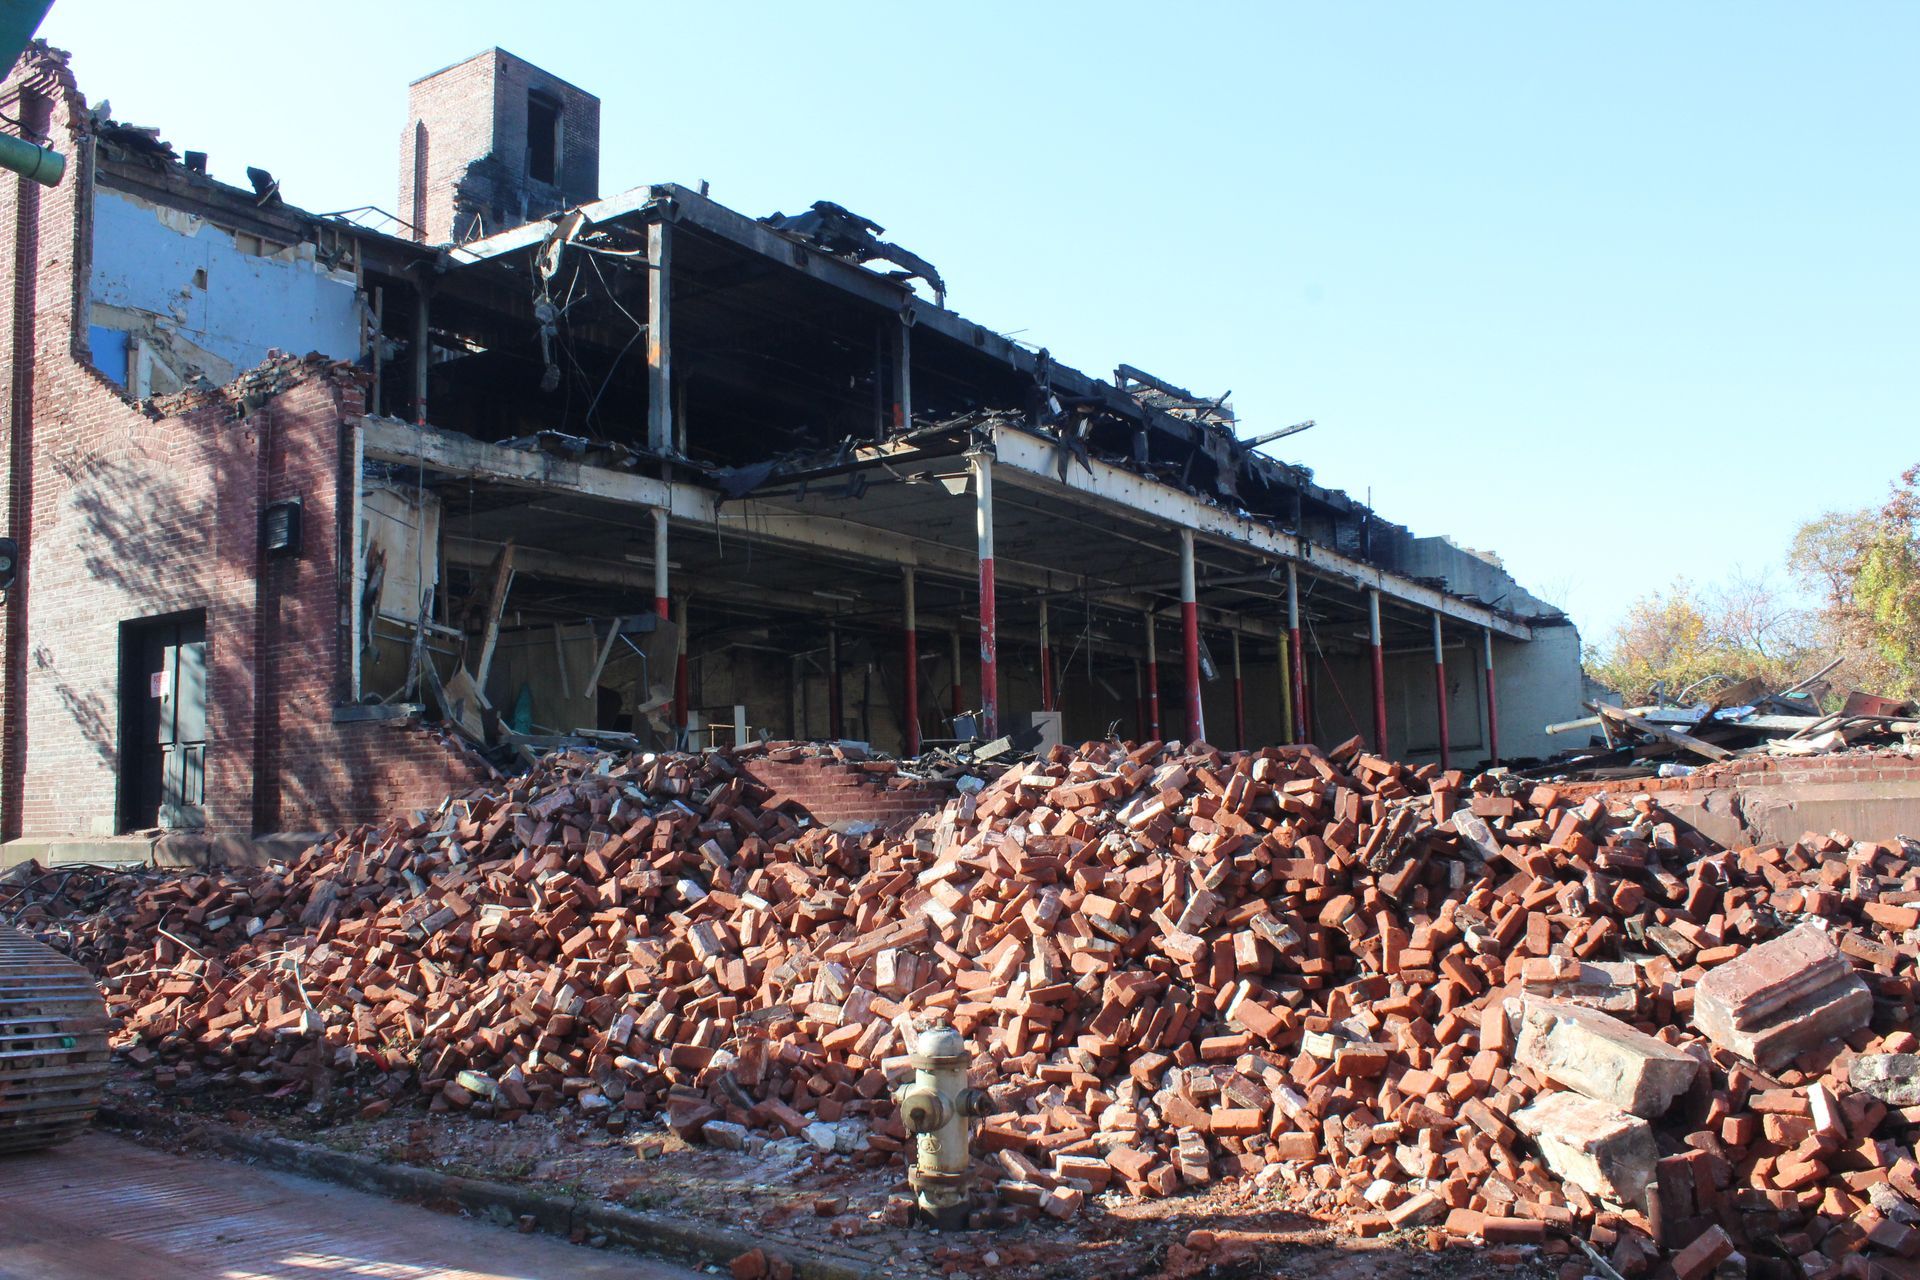 A large pile of bricks is sitting in front of a building that is being demolished.